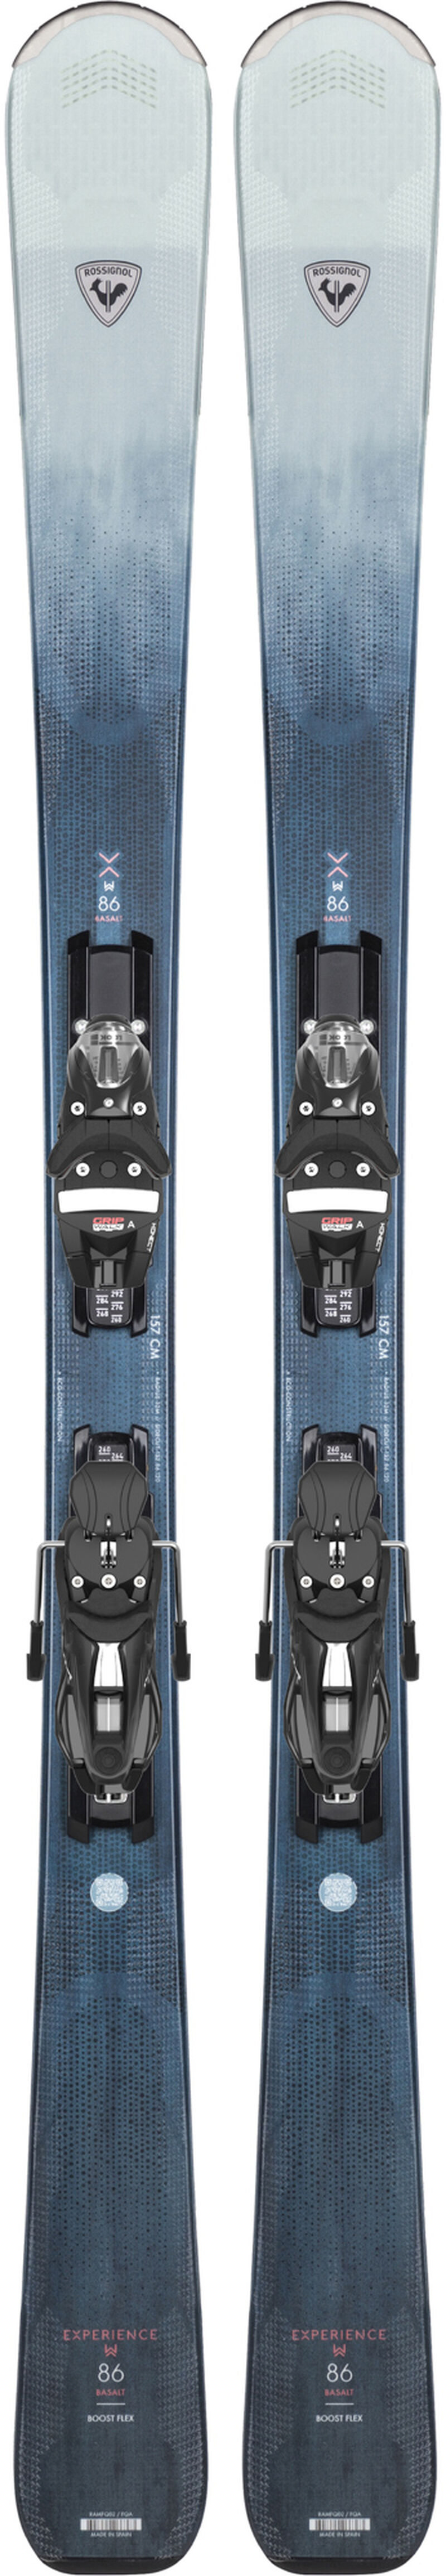 Rossignol Skis All Mountain femme EXPERIENCE W 86 BASALT (KONECT) 